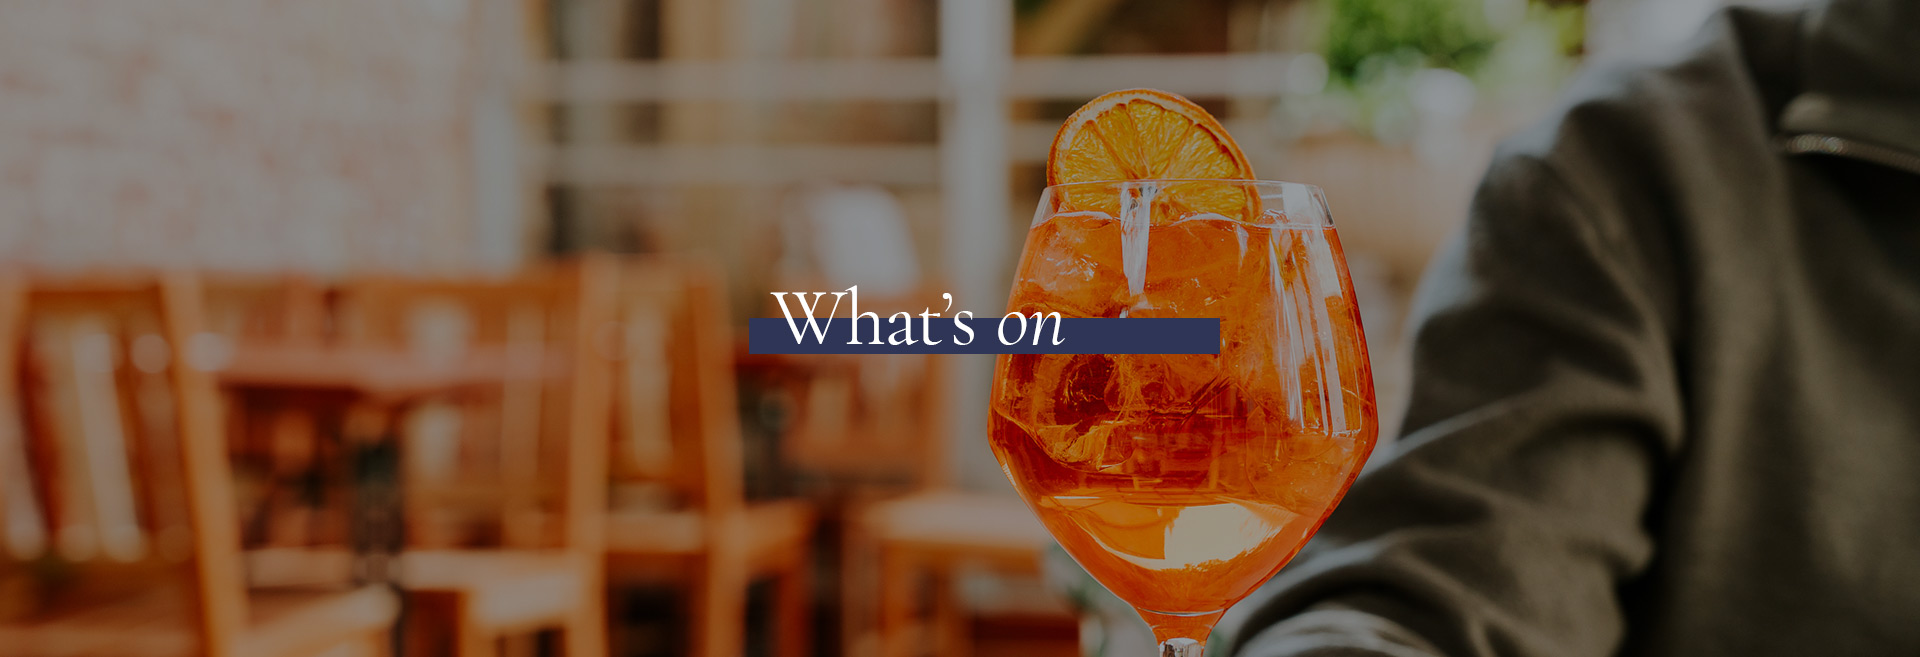 What's On at The Market Tavern